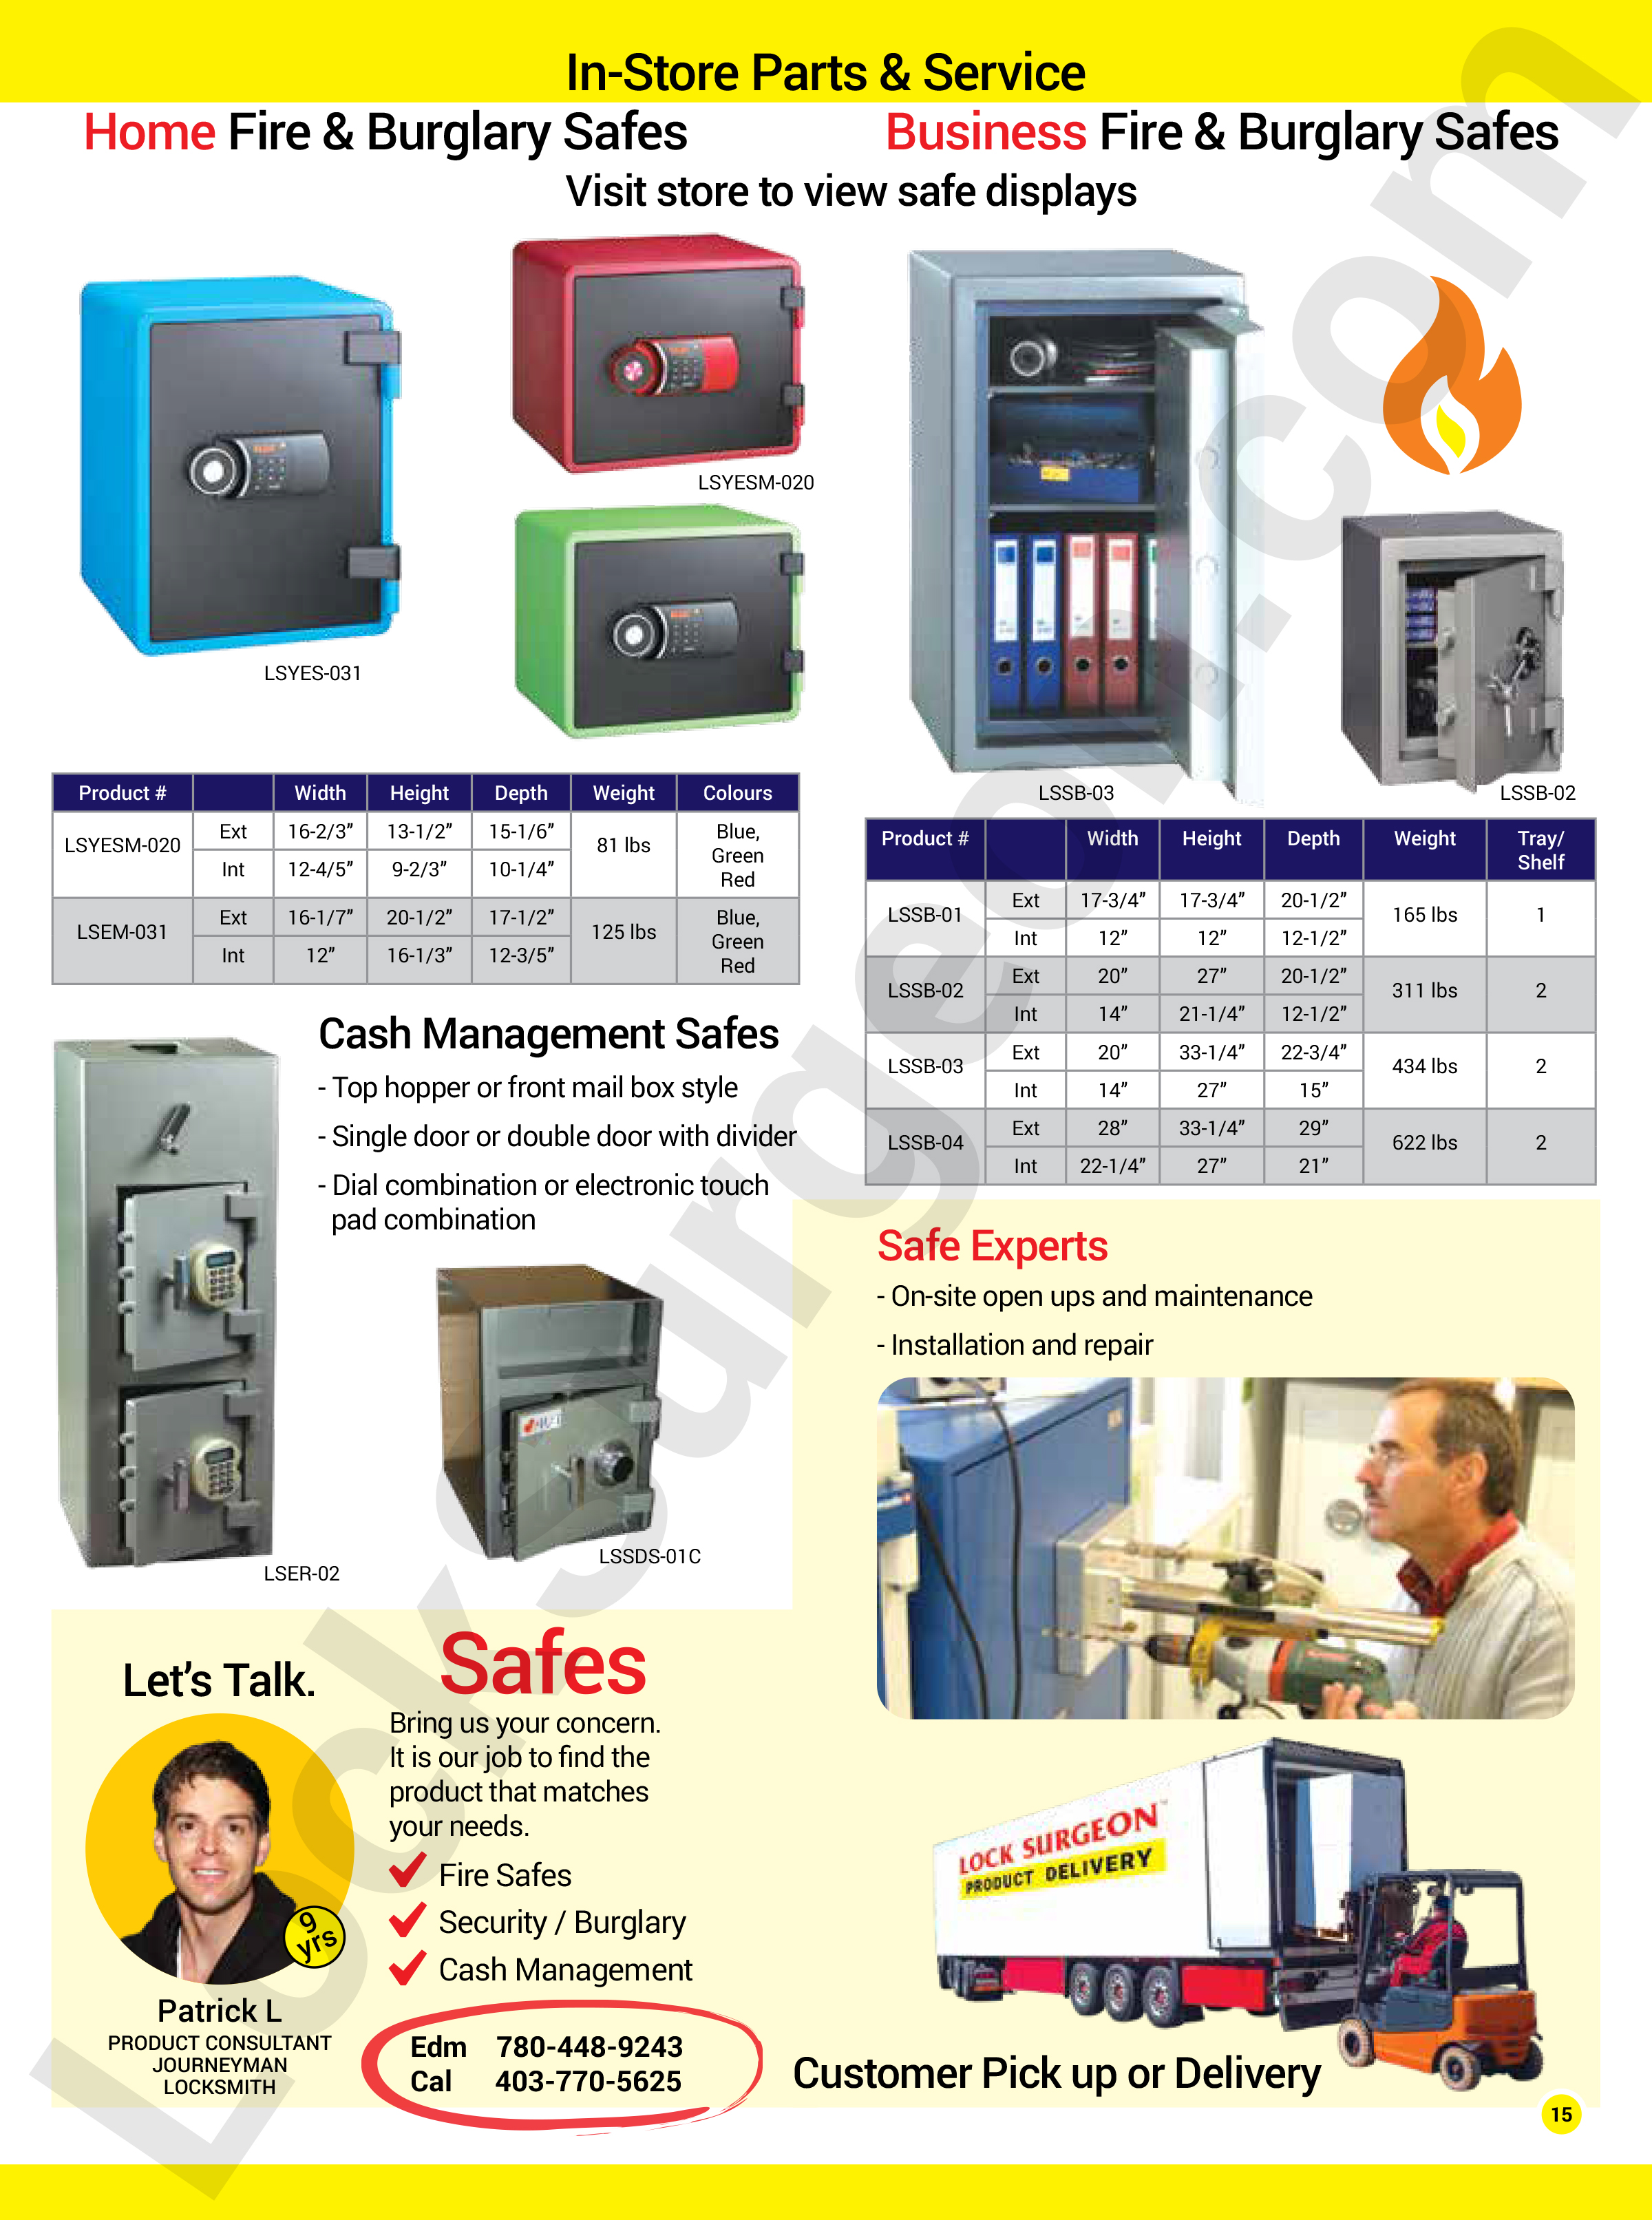 Residential home fire & burglary safes in a variety of sizes. Commercial business fire and burglary.